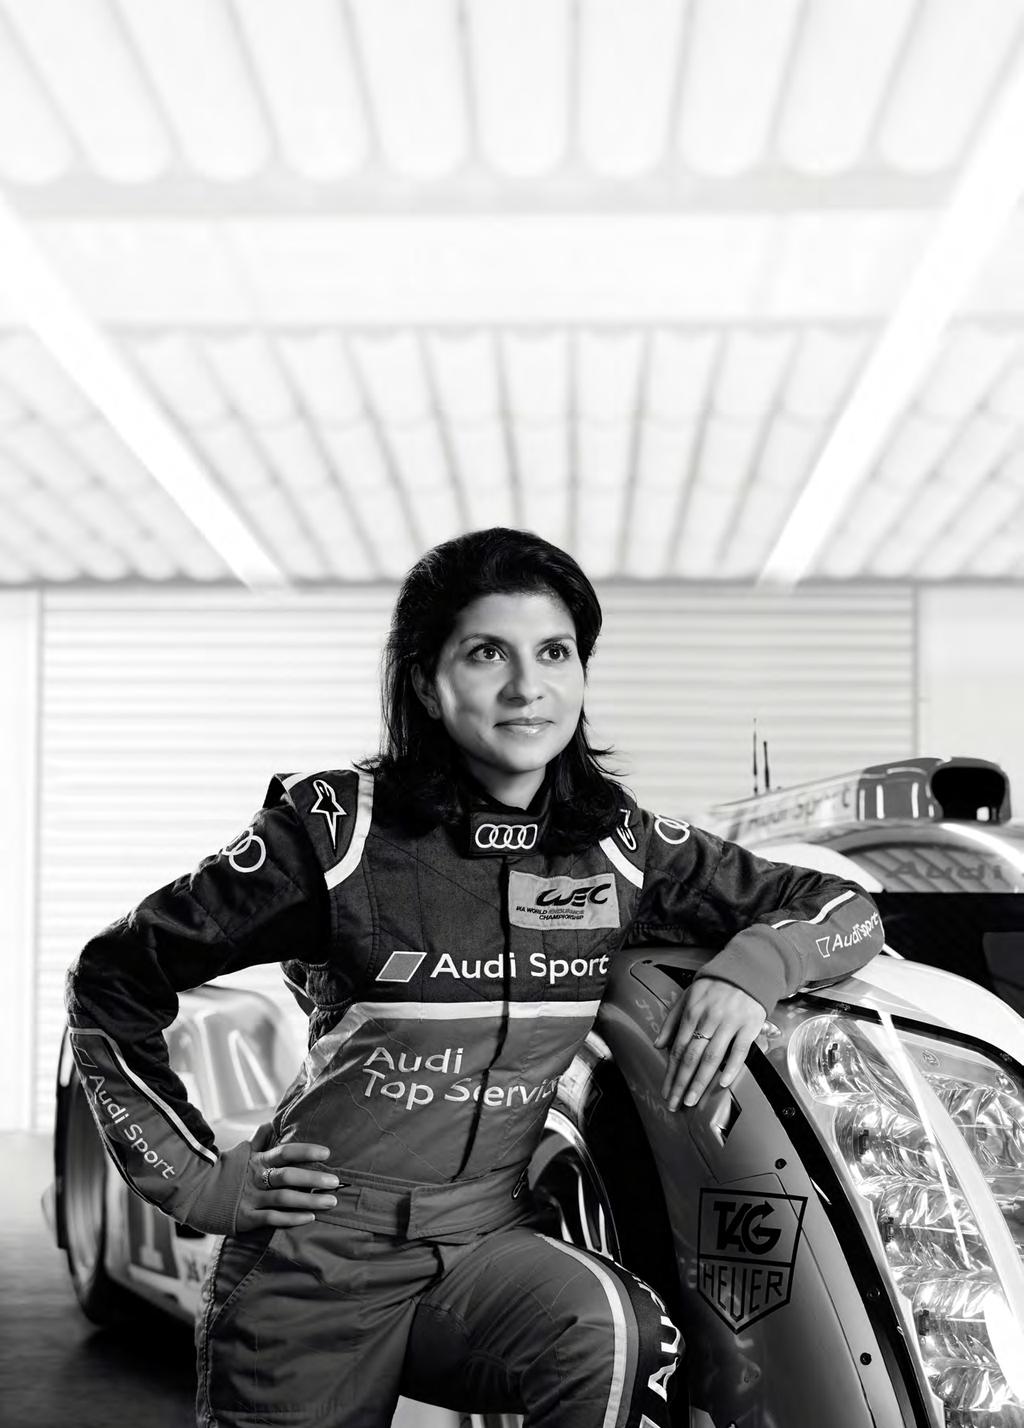 From an early age, I wanted to become an engineer. Even as a little girl growing up in India, I disassembled and then reassembled our radio. I have since become an Audi racing engineer.